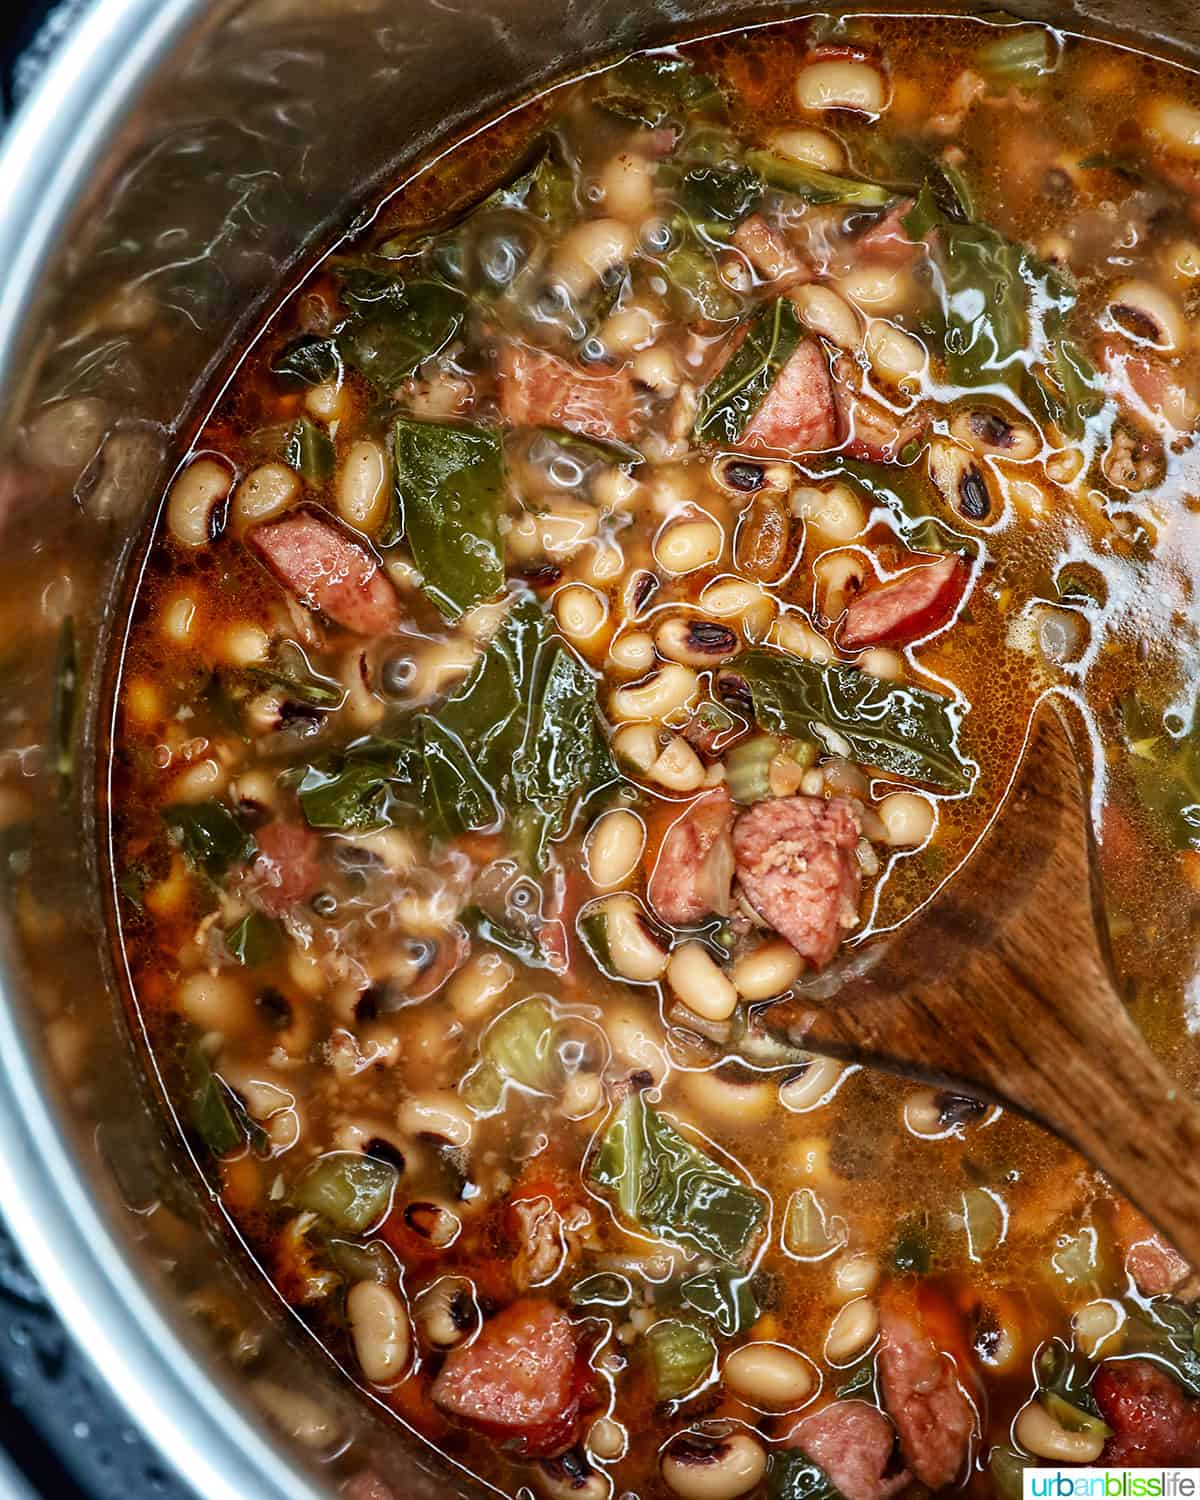 black eyed peas with collard greens, bacon, sausage, and vegetables in broth, in the Instant Pot.